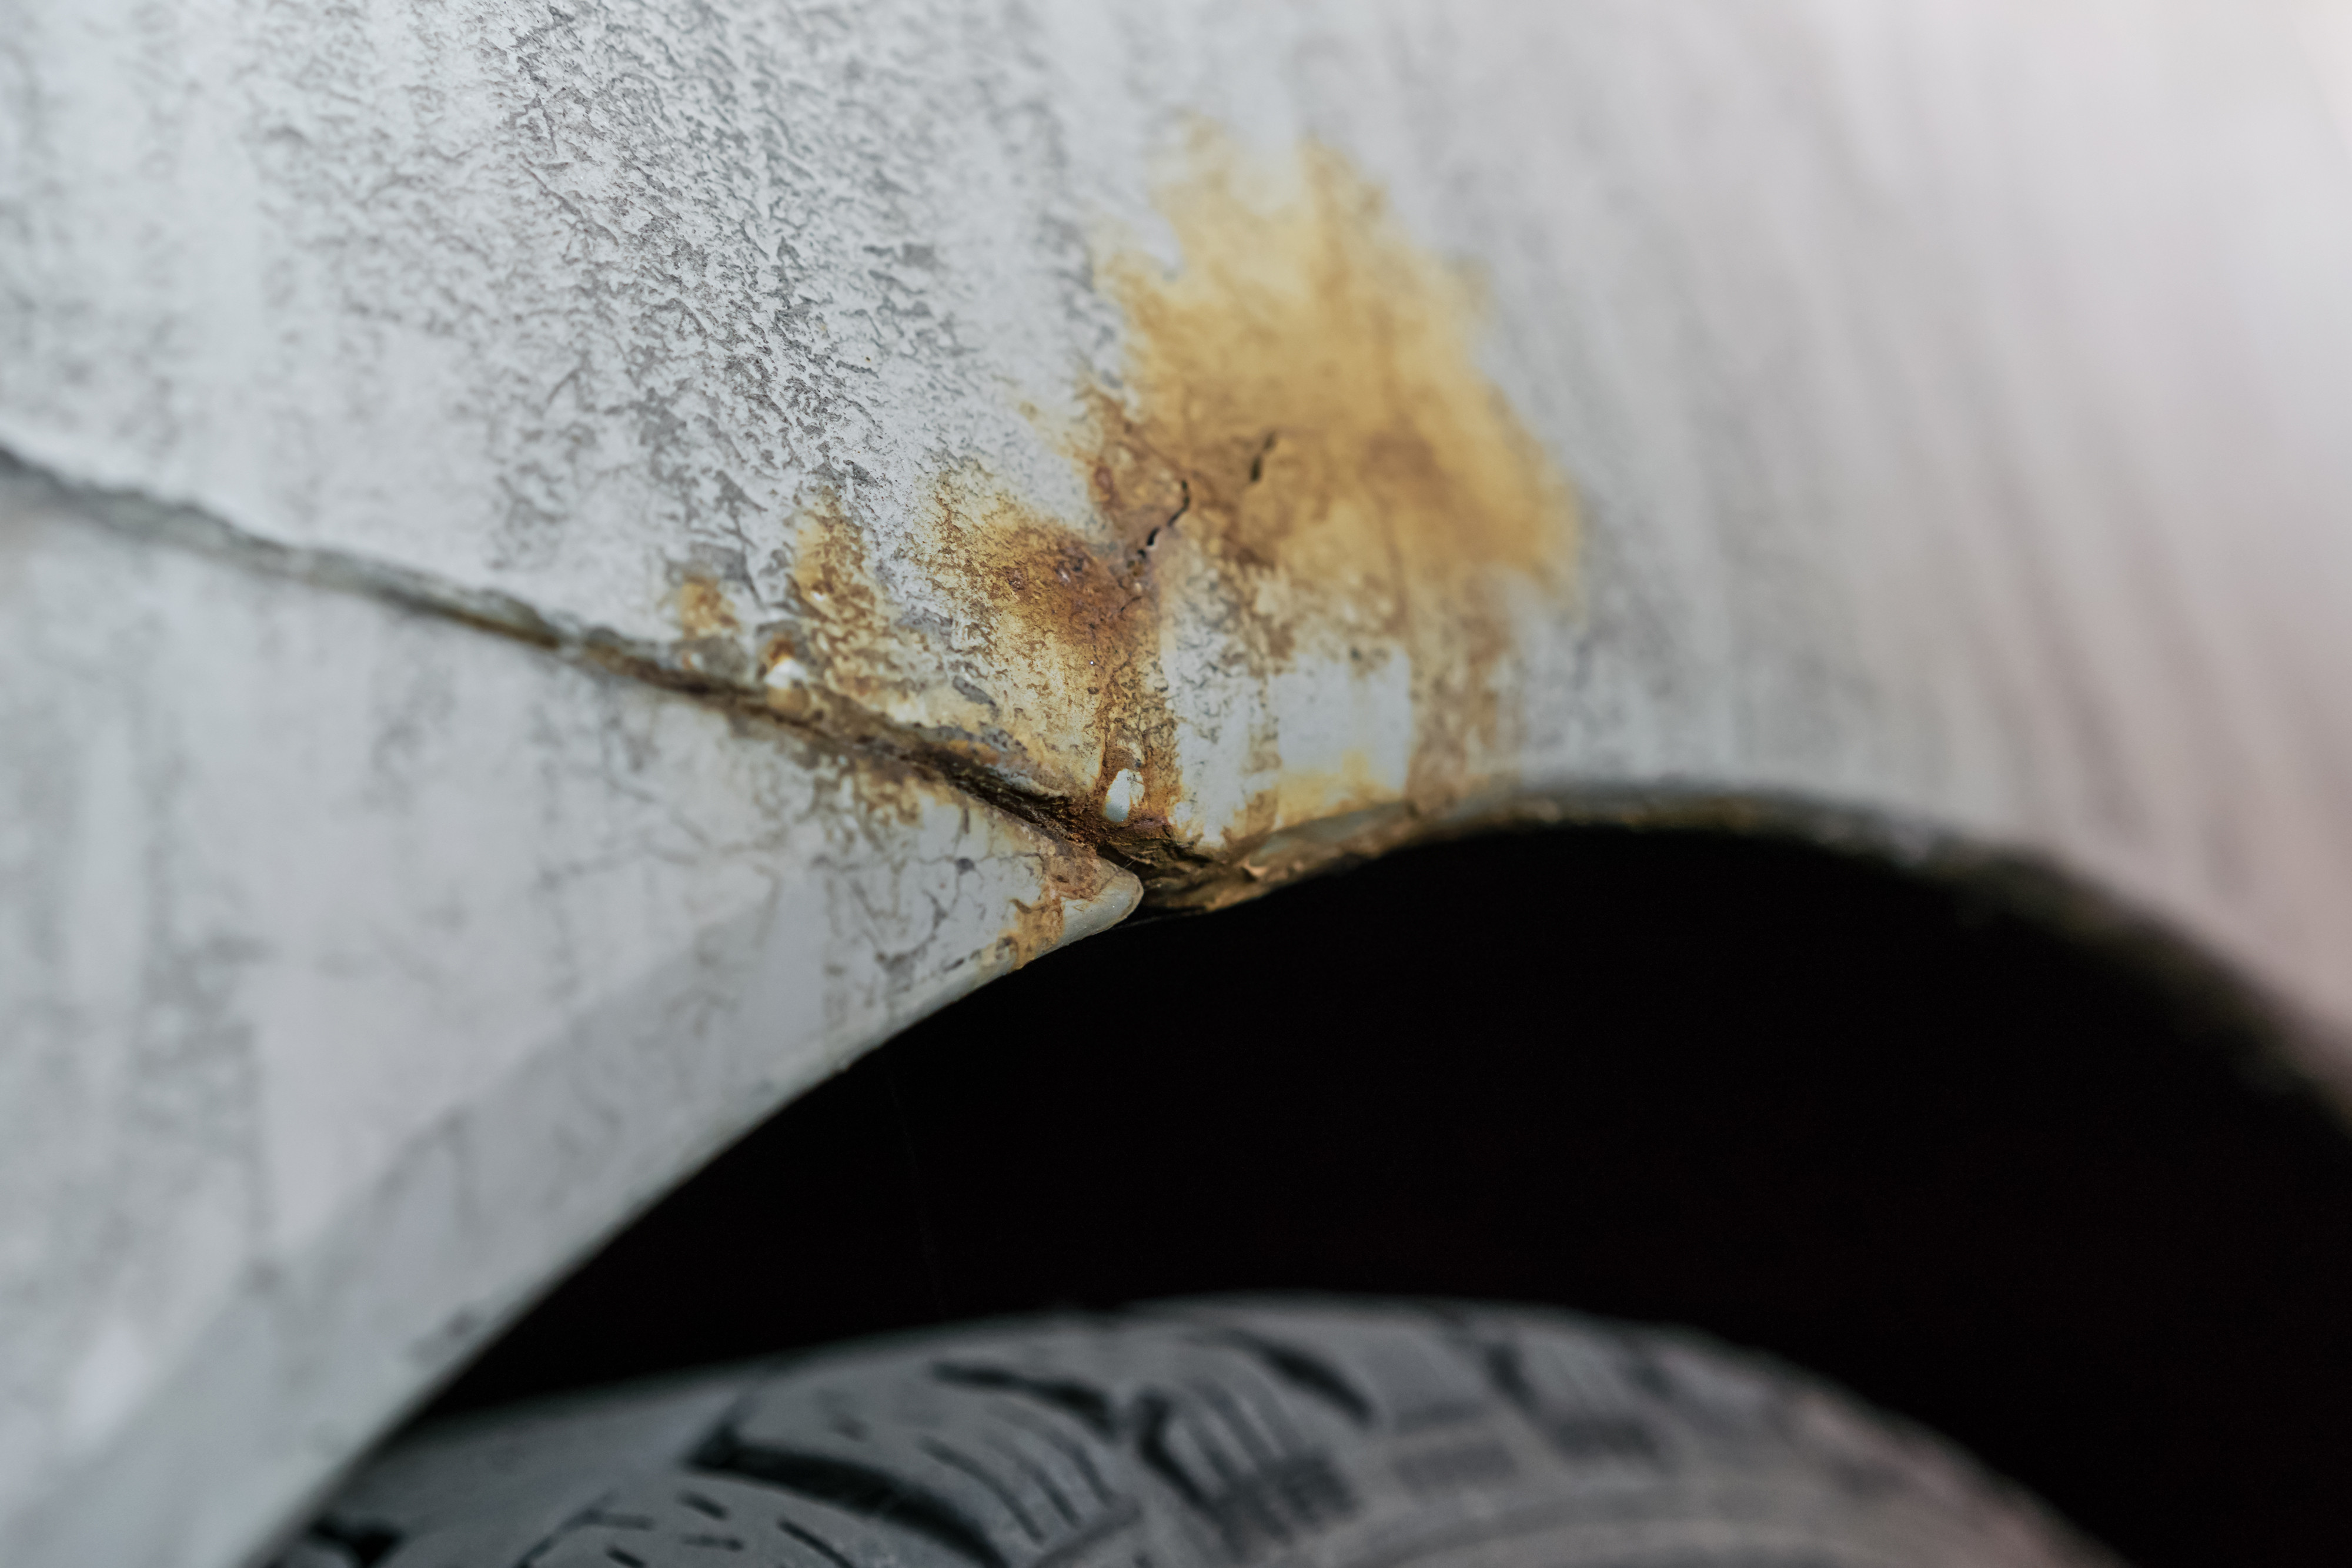 Drivers often spend a fortune trying to repair rust spots on their car